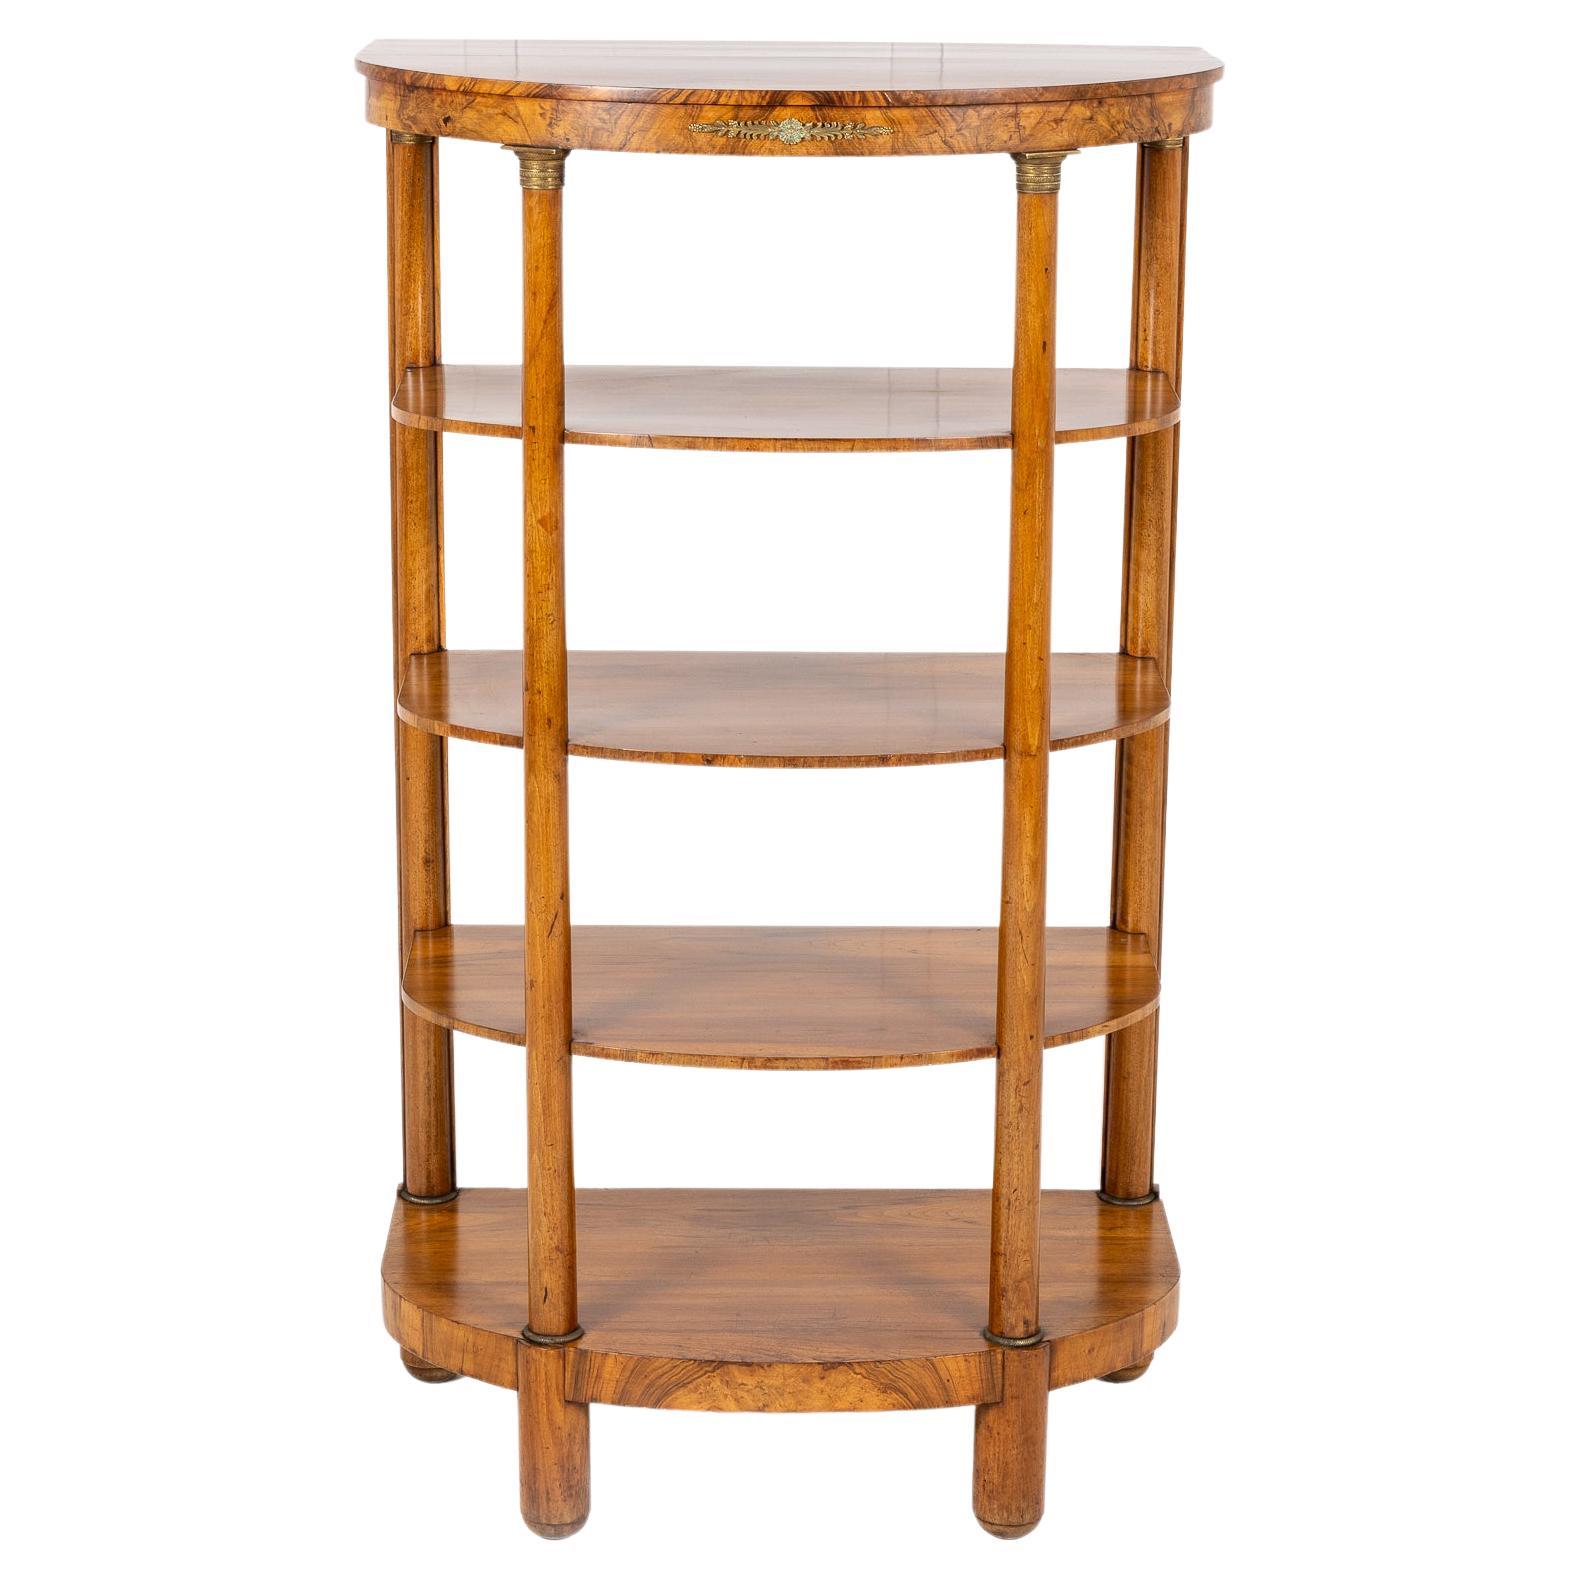 19th Century French Walnut Display Stand / Étagère